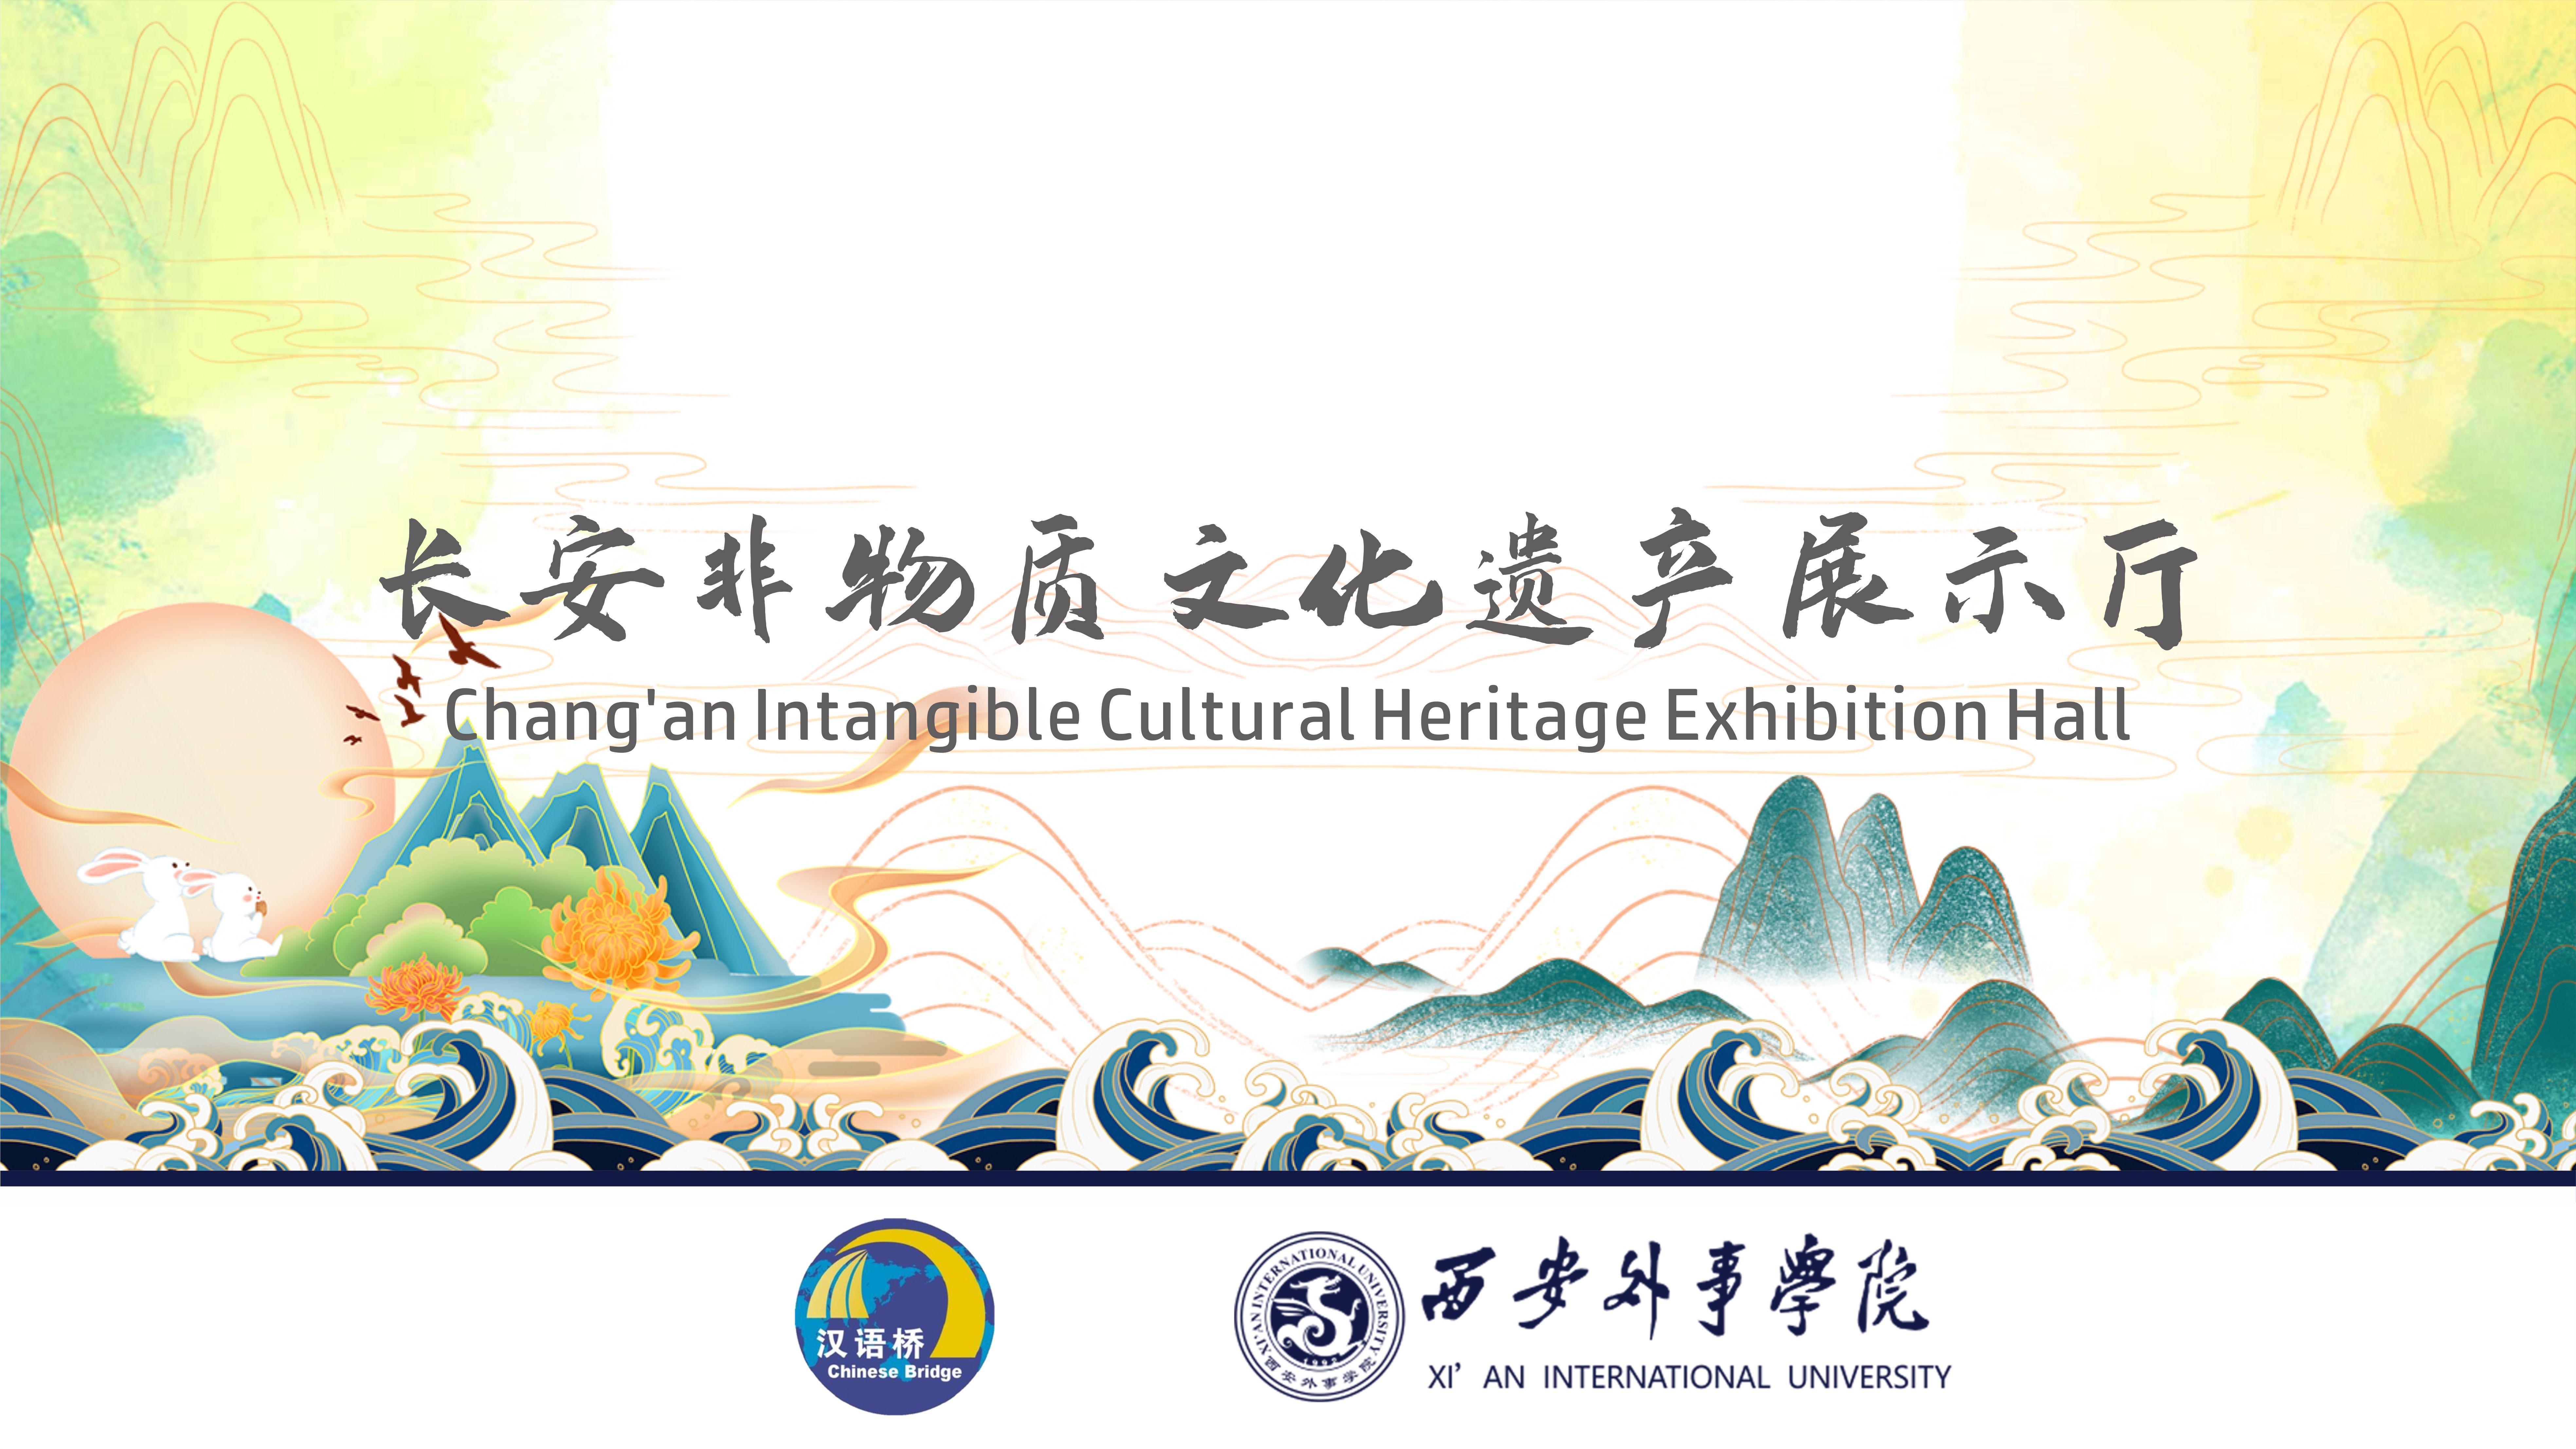 Chang’an Intangible Cultural Heritage Exhibition Hall